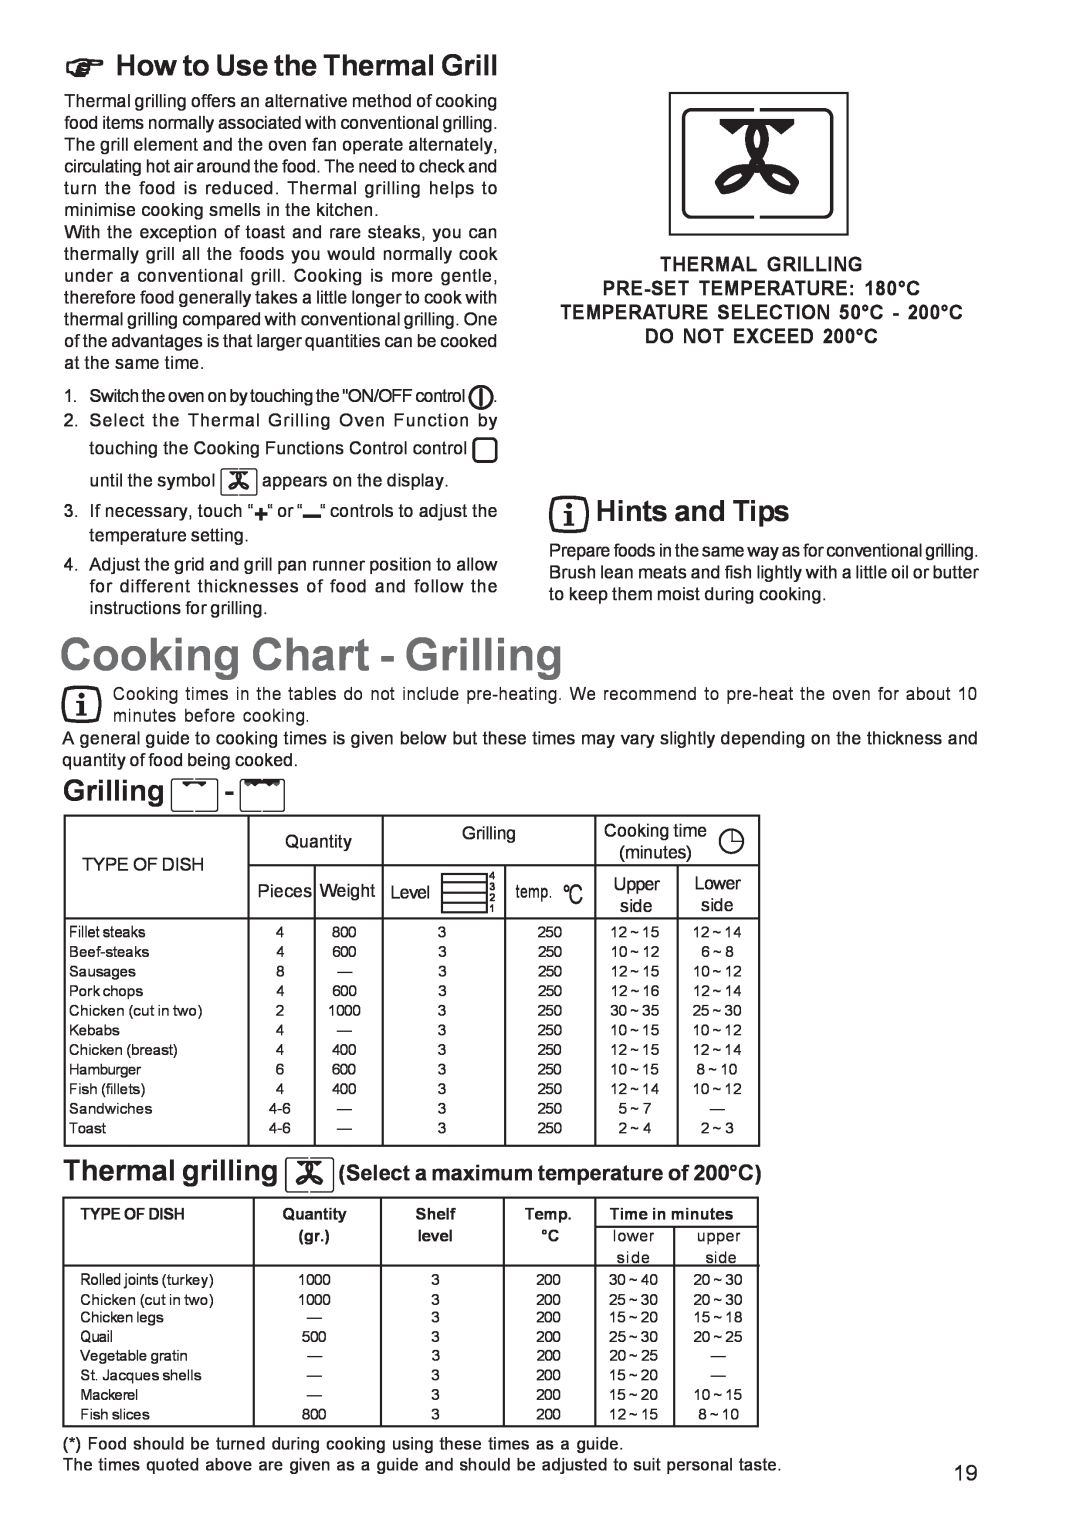 Zanussi ZBP 1165 manual How to Use the Thermal Grill, Grilling, Thermal grilling, THERMAL GRILLING PRE-SETTEMPERATURE 180C 